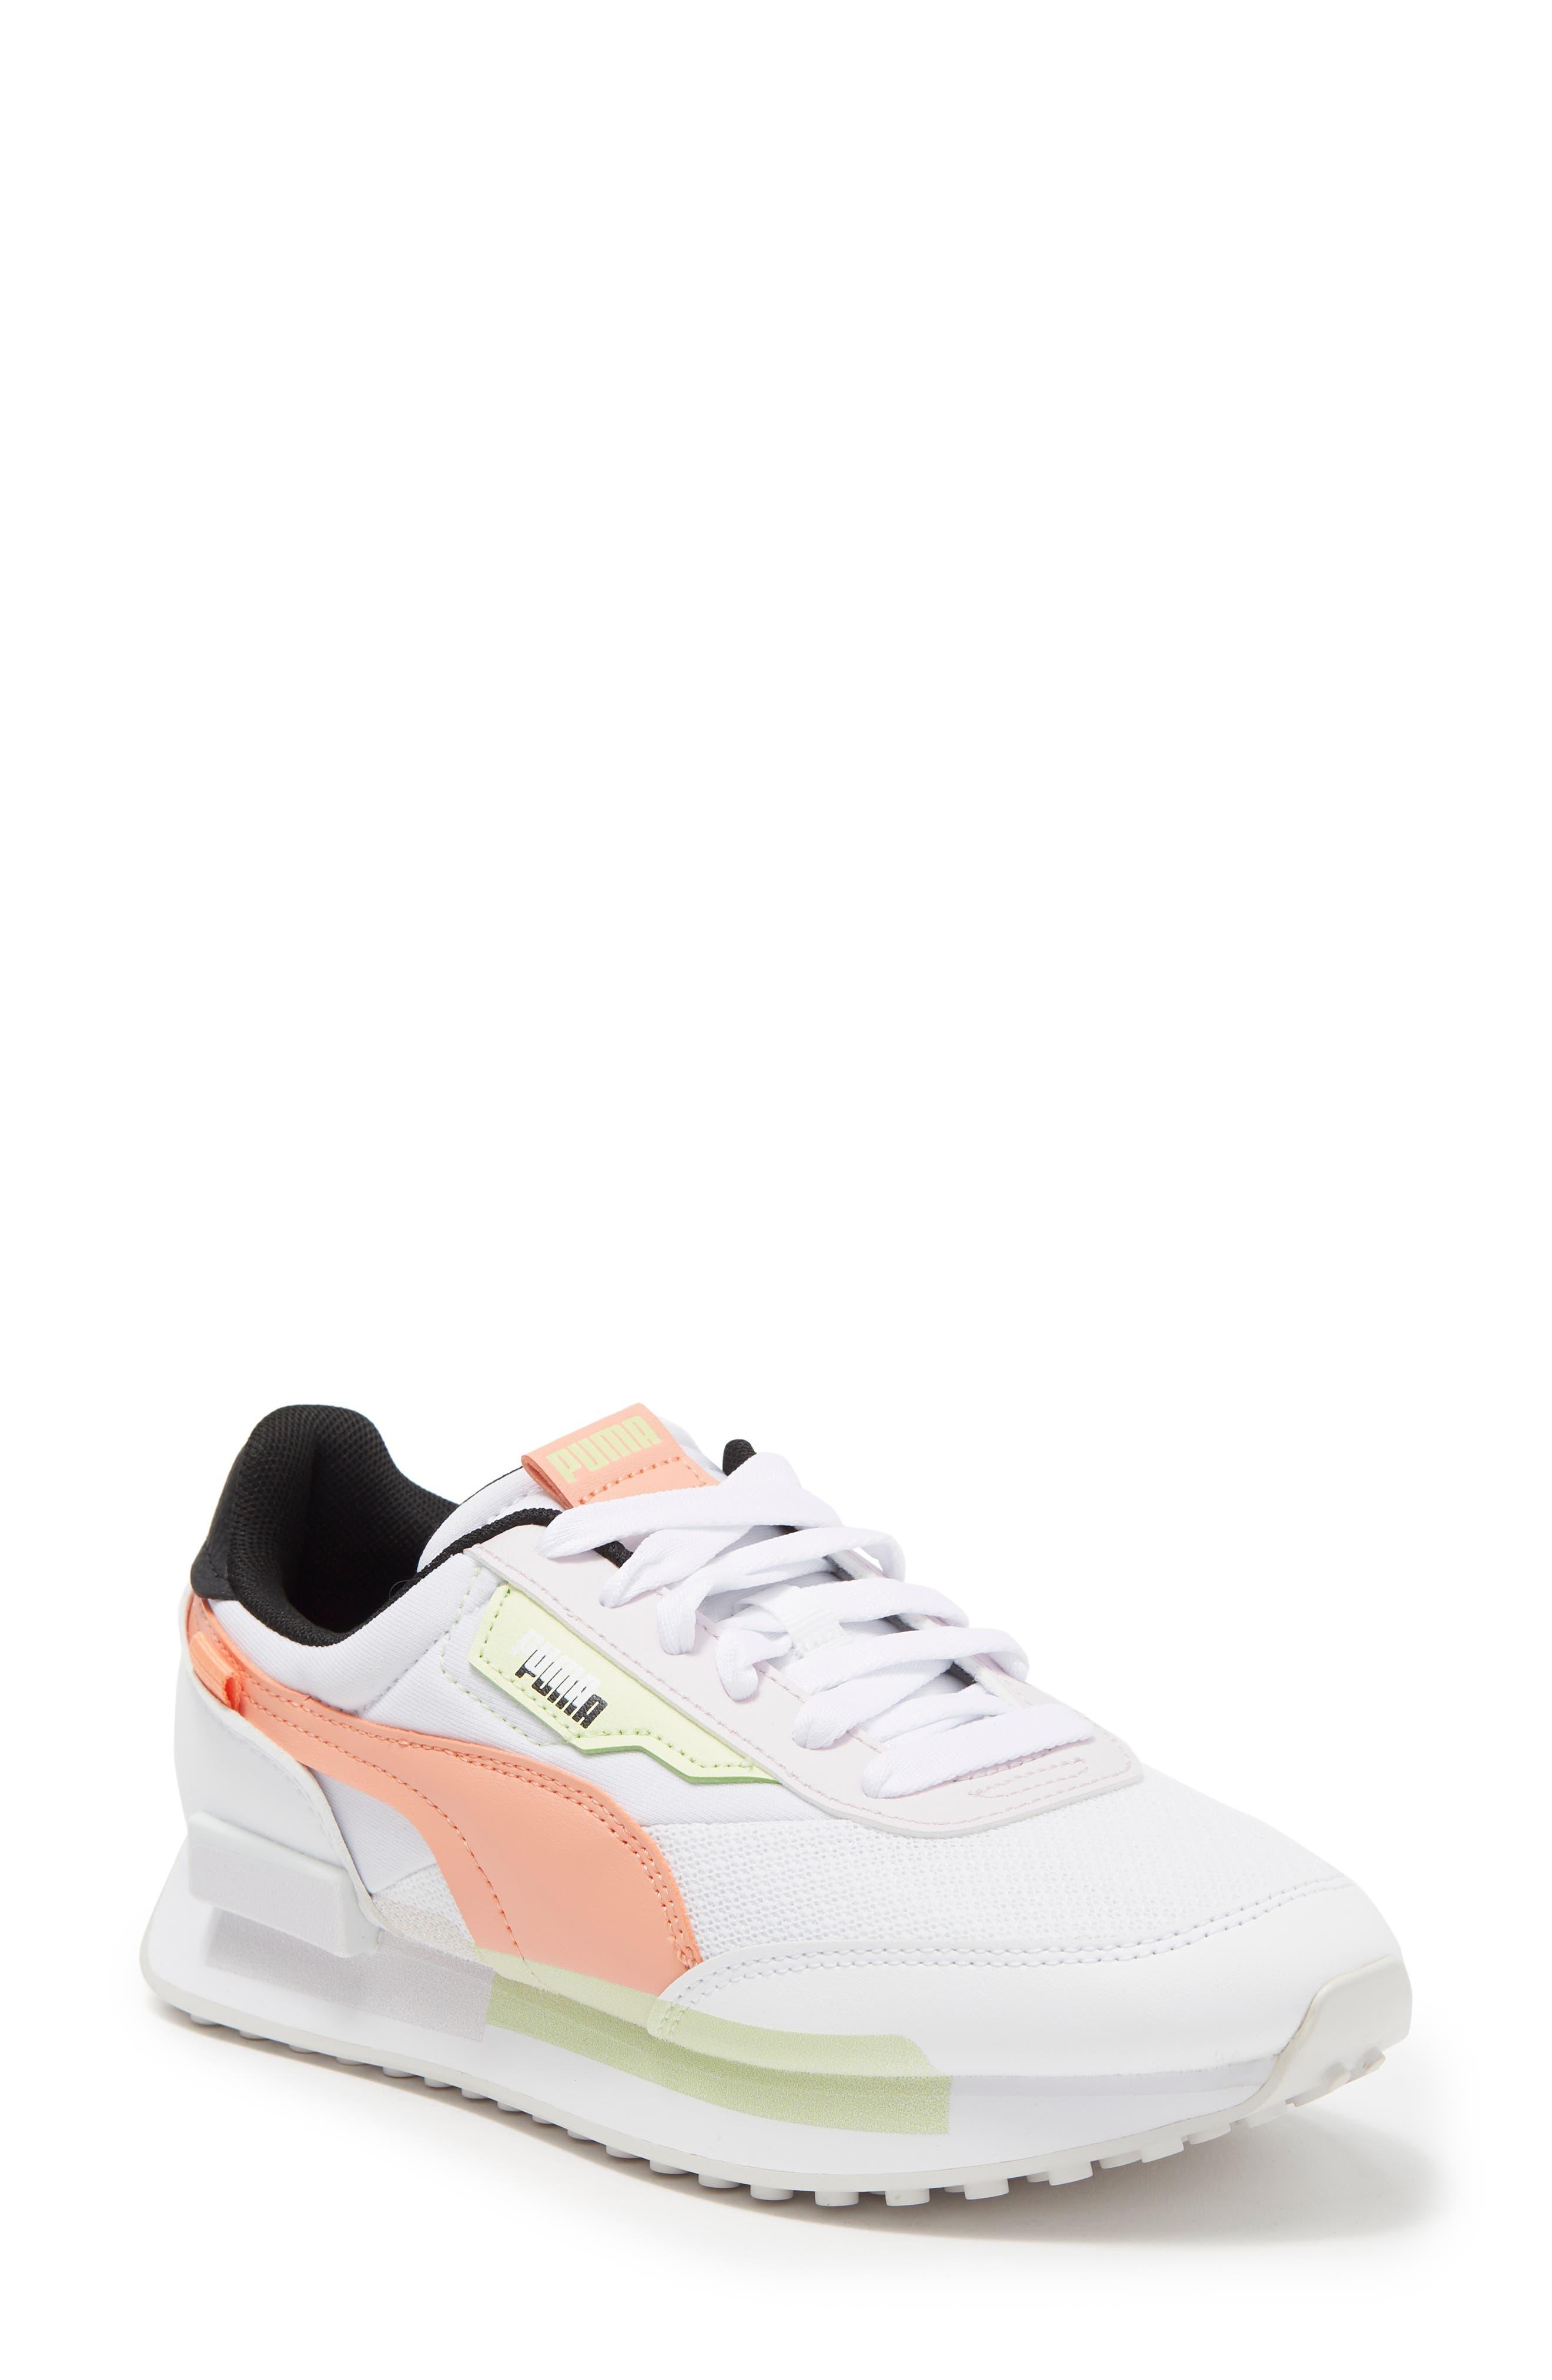 PUMA Future Rider Mis Sneaker In White/peach Pink/butterfly At Nordstrom  Rack | Lyst